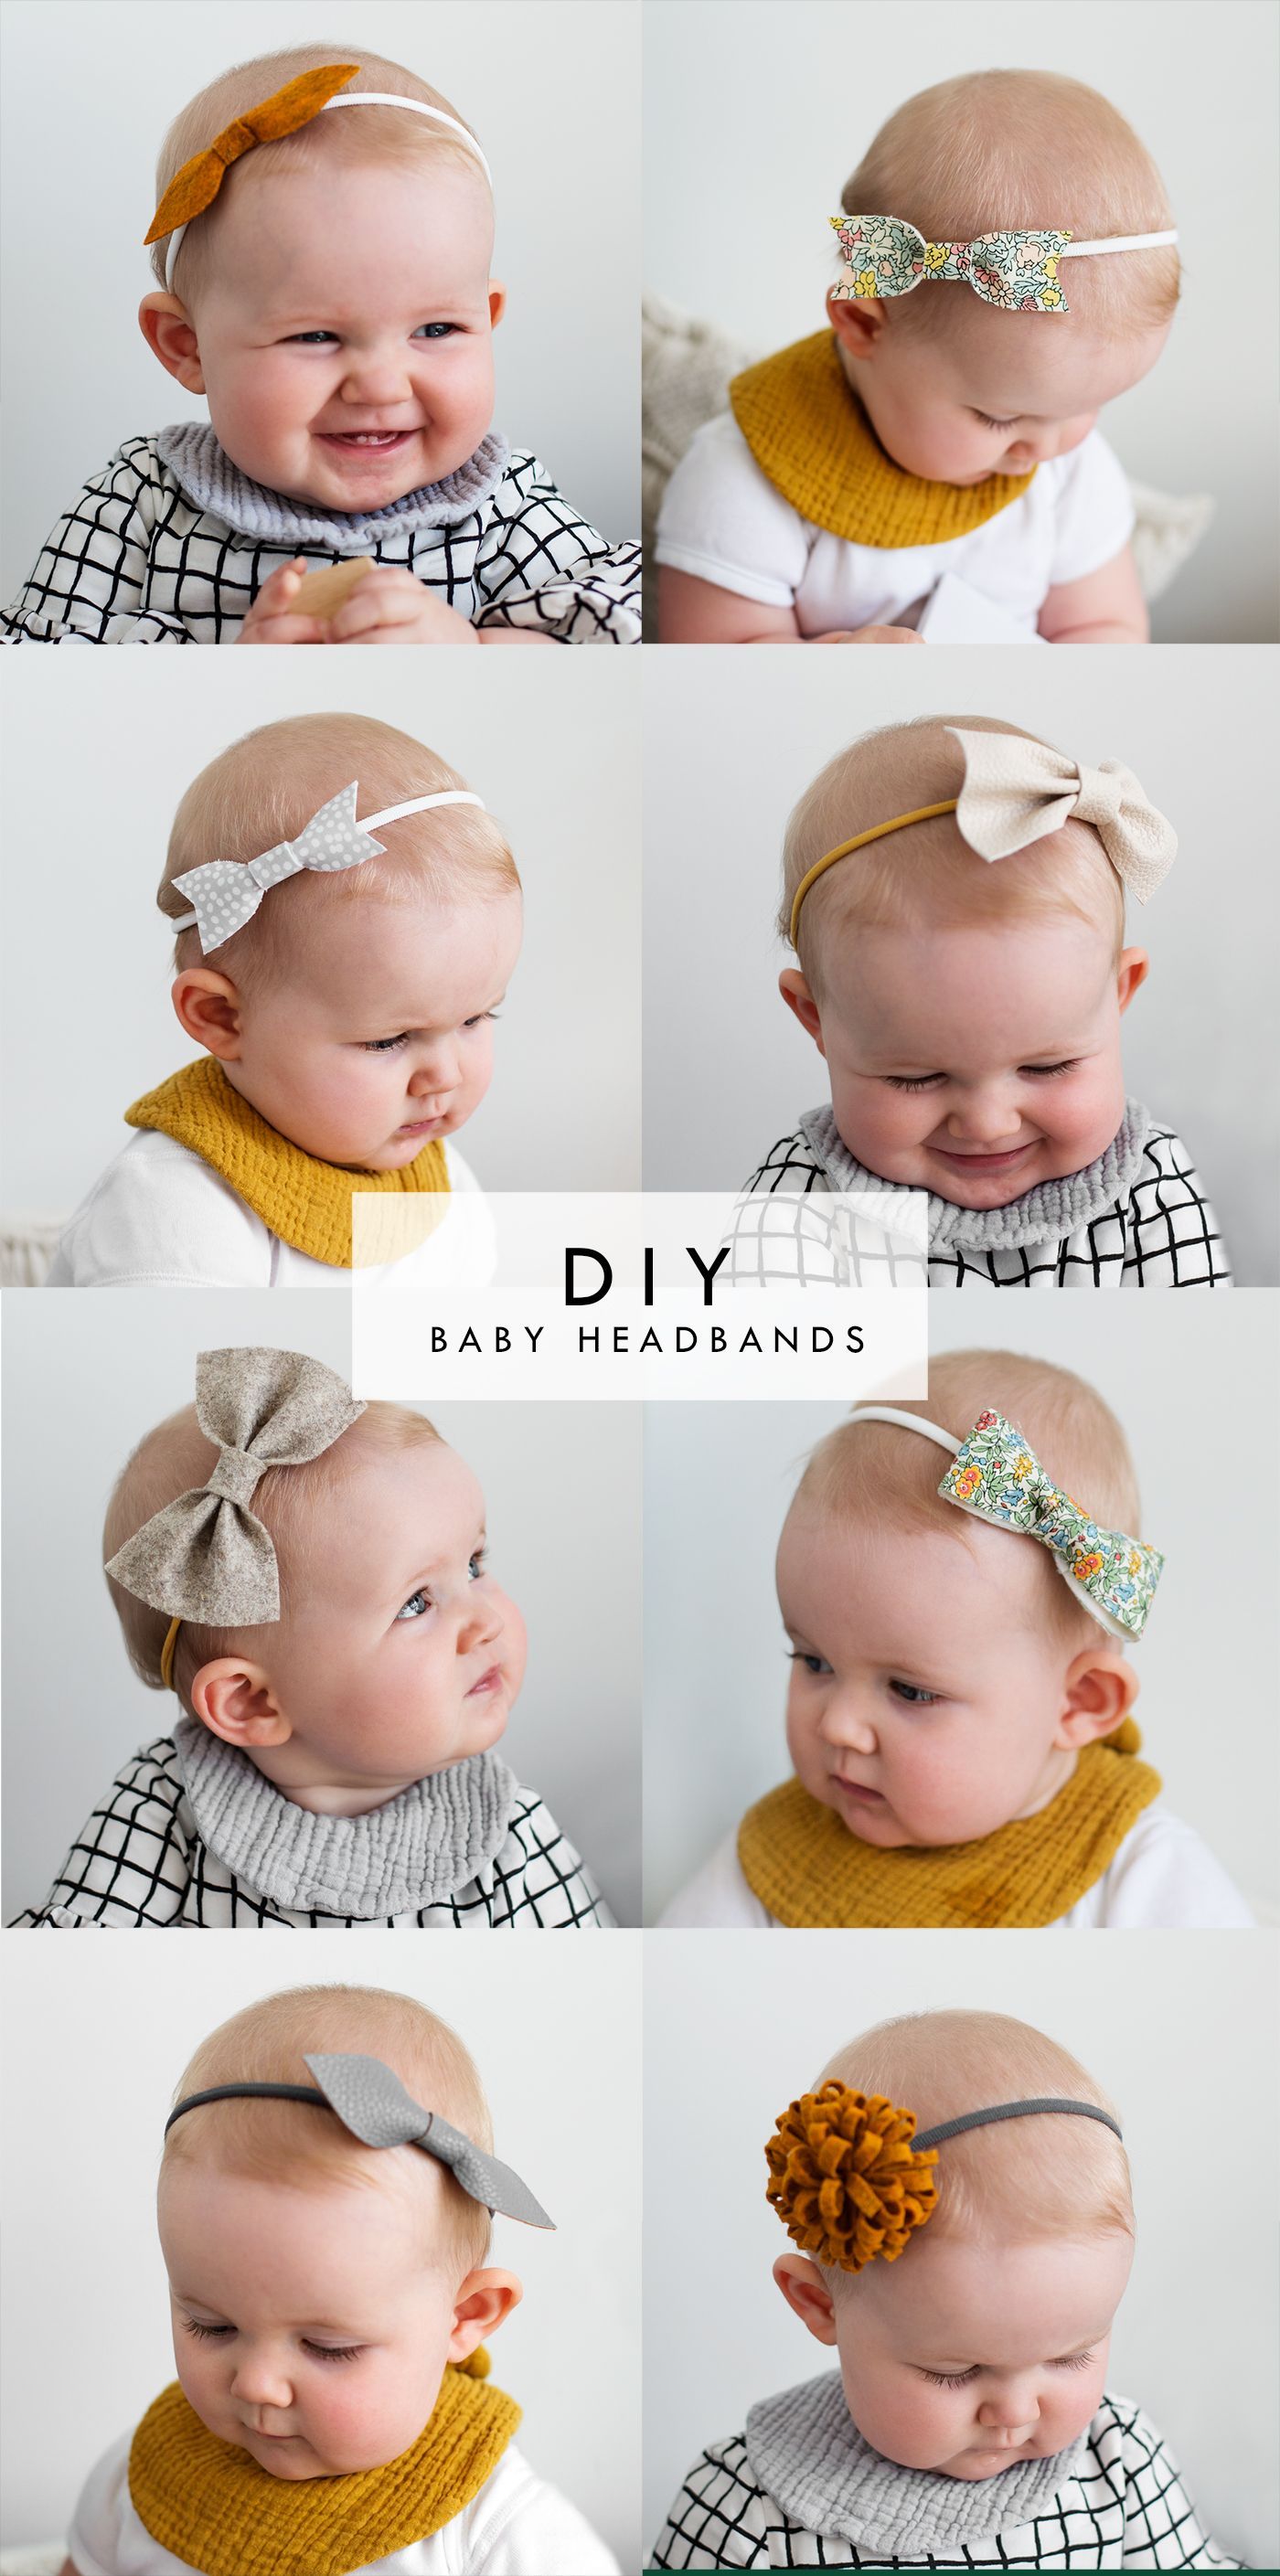 Pretty Little Thing | The Lovely Drawer - Pretty Little Thing | The Lovely Drawer -   17 diy Baby headbands ideas